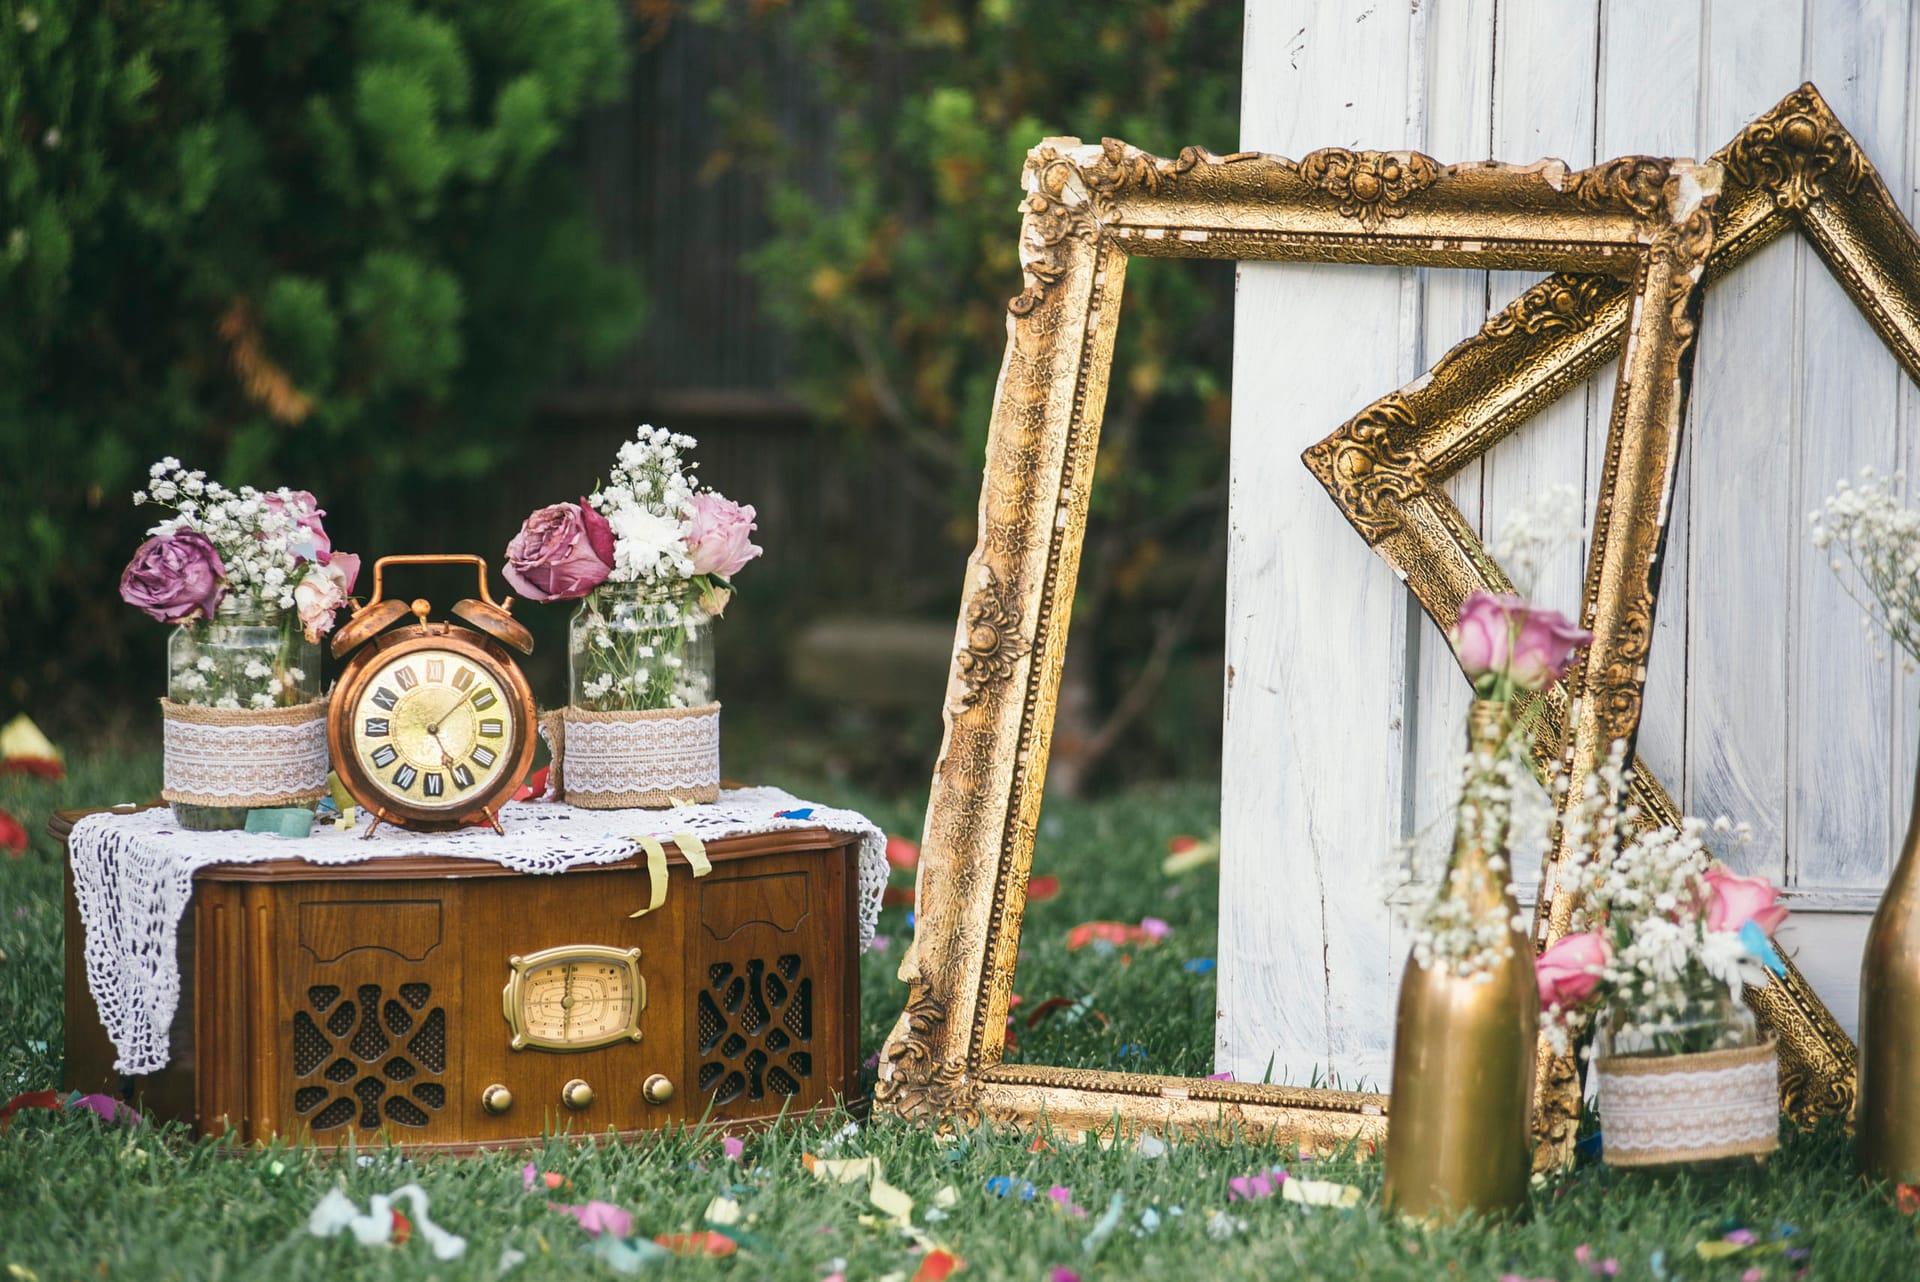 DIY Decor Ideas for an Engagement Party